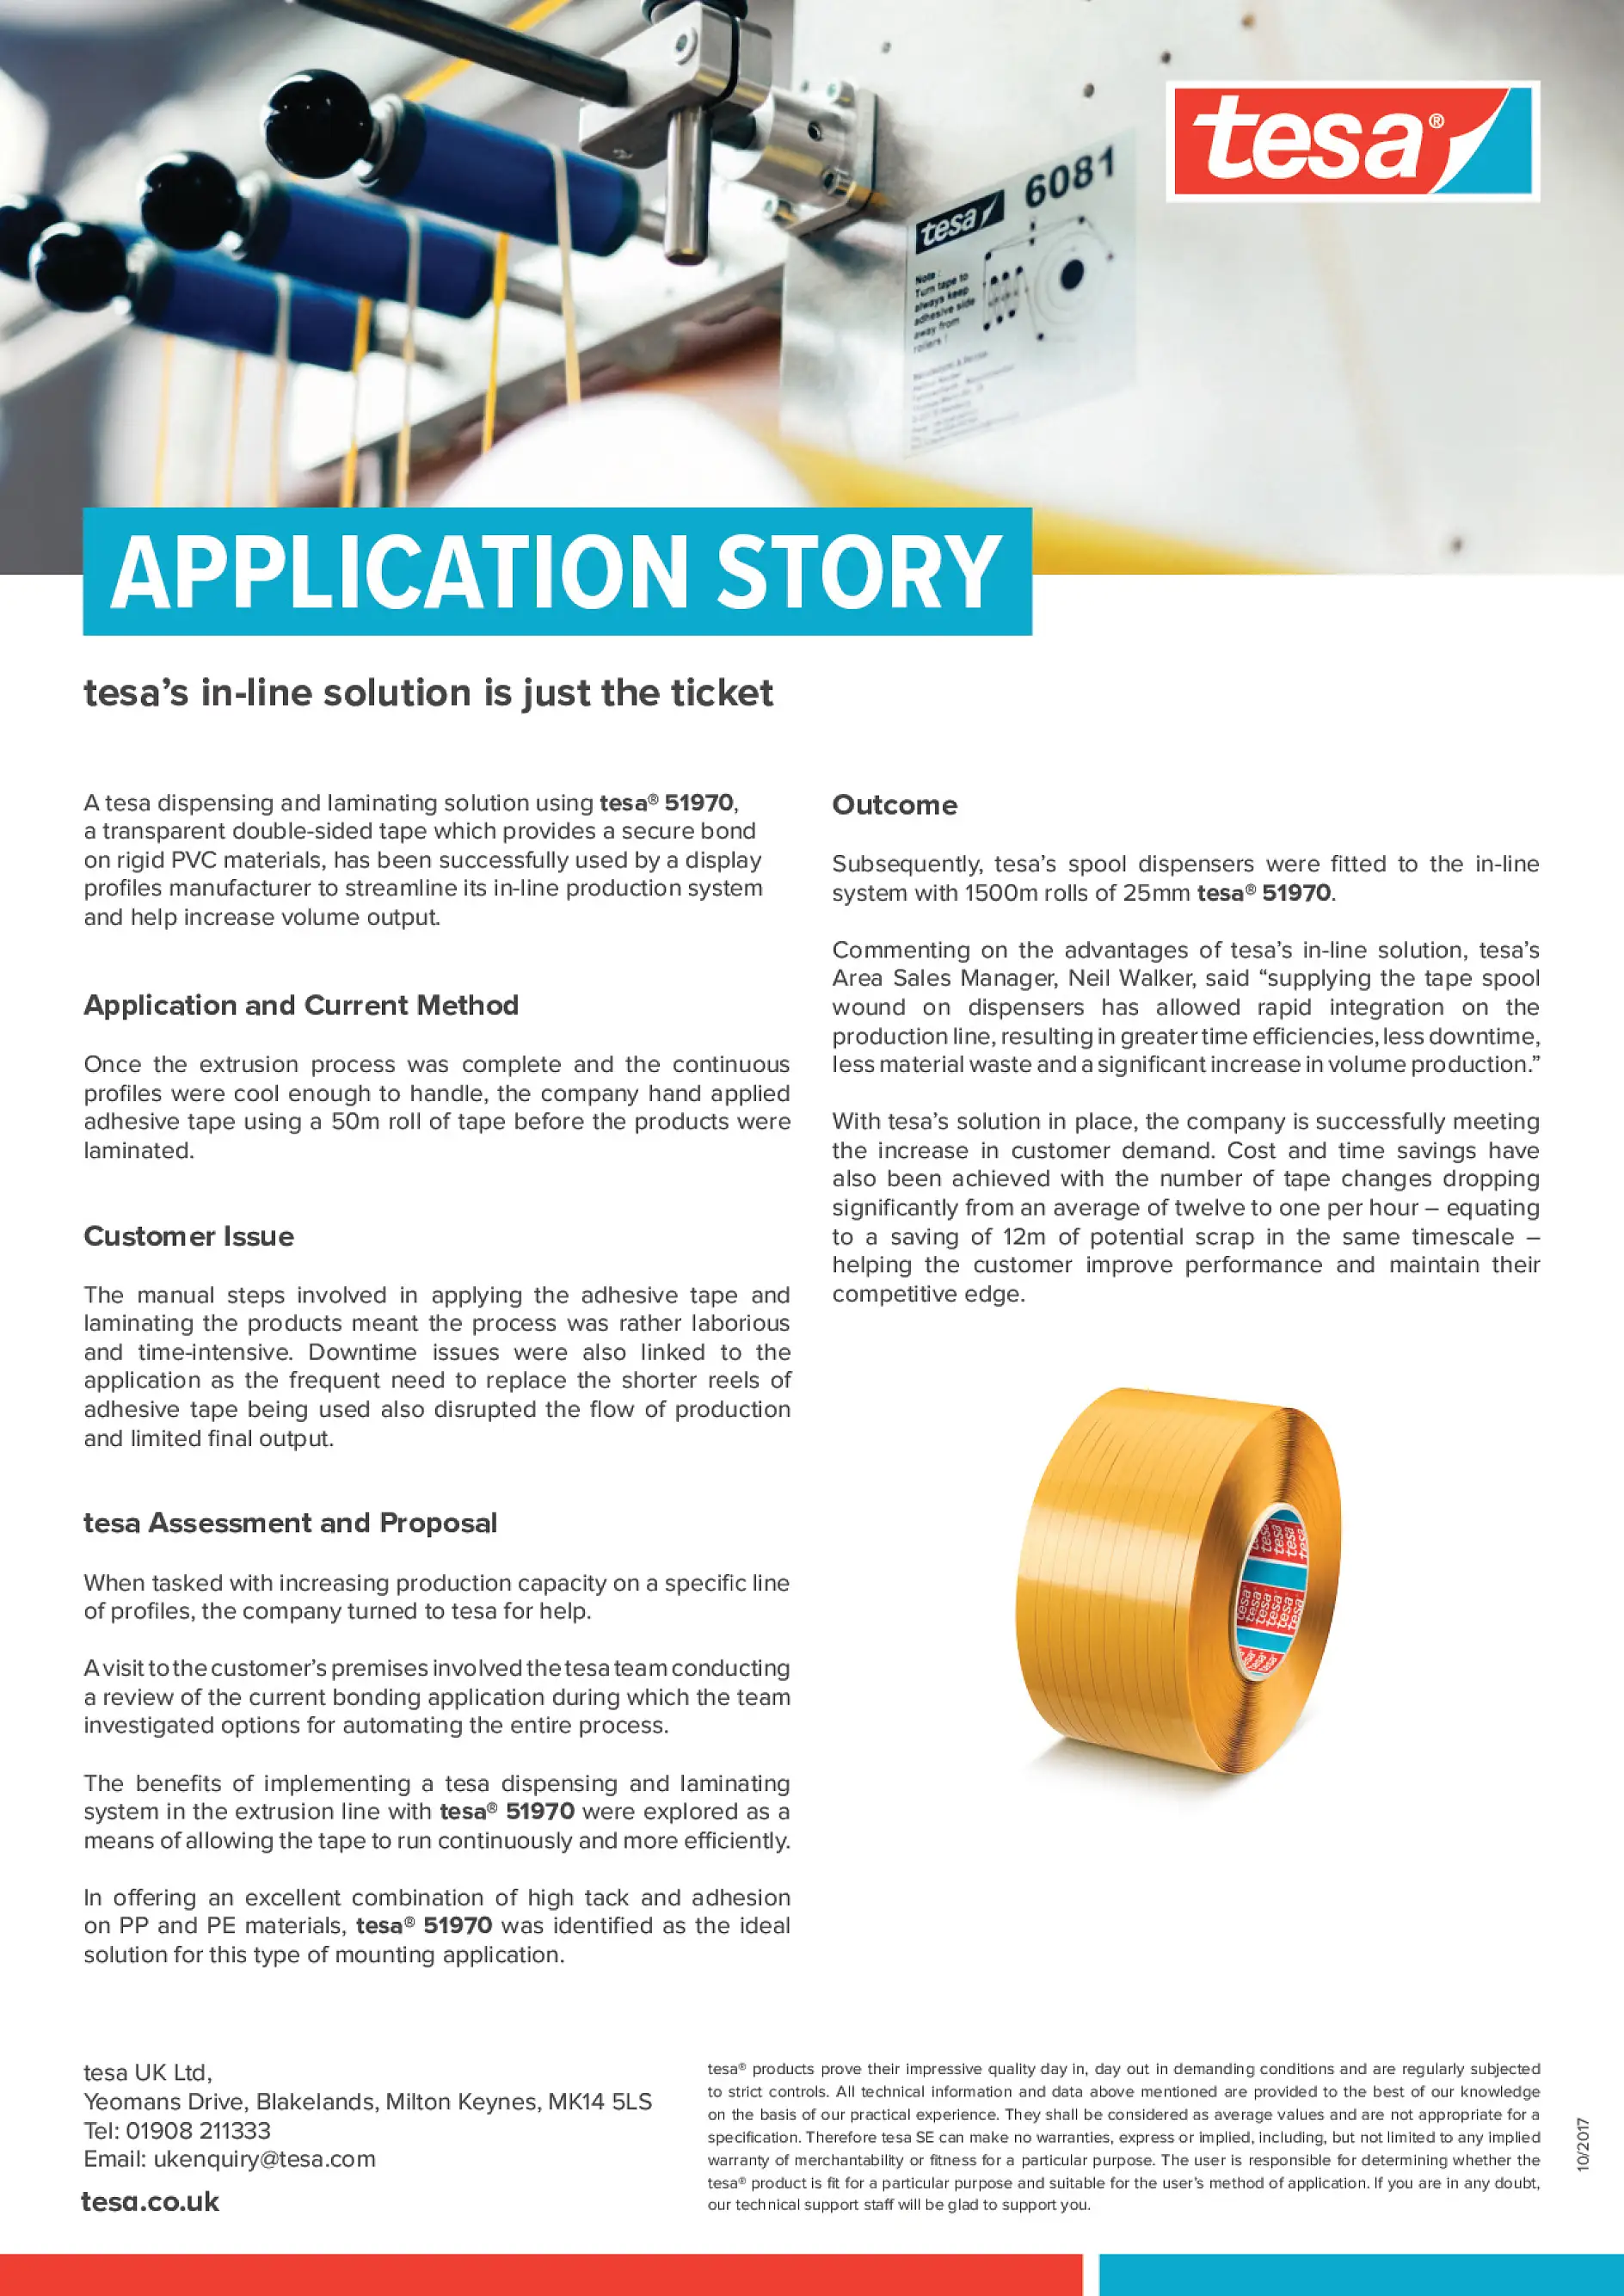 APPLICATION STORY - Plastic Extrusions